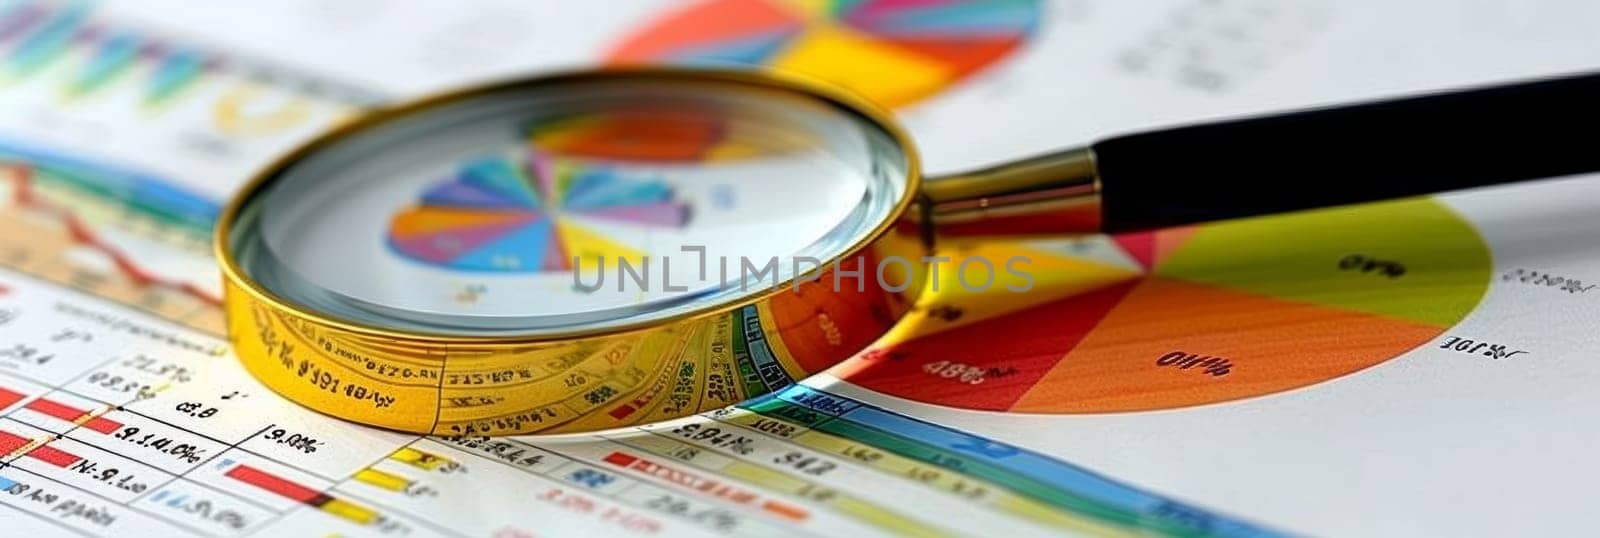 A magnifying glass hovers over colorful financial charts and graphs, highlighting the details and insights within the data